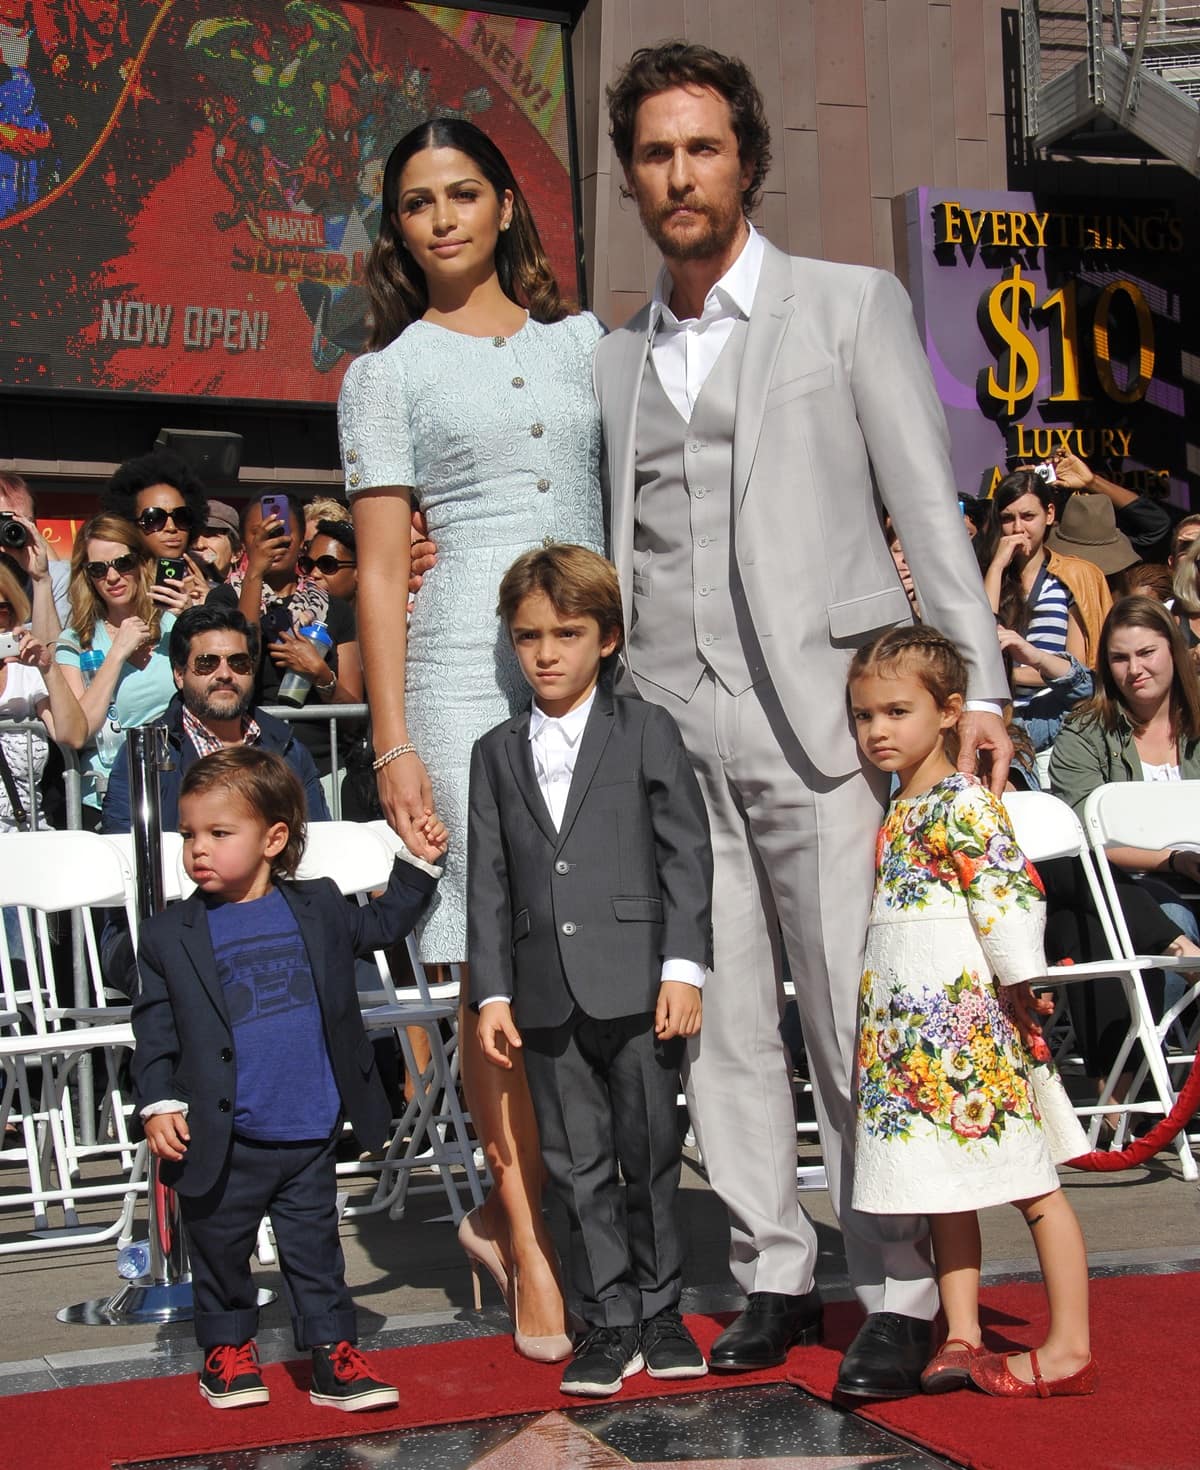 Actor Matthew McConaughey and wife/model Camila Alves with children Livingston, Levi, and Vida at Matthew McConaughey's Star Ceremony On The Hollywood Walk Of Fame